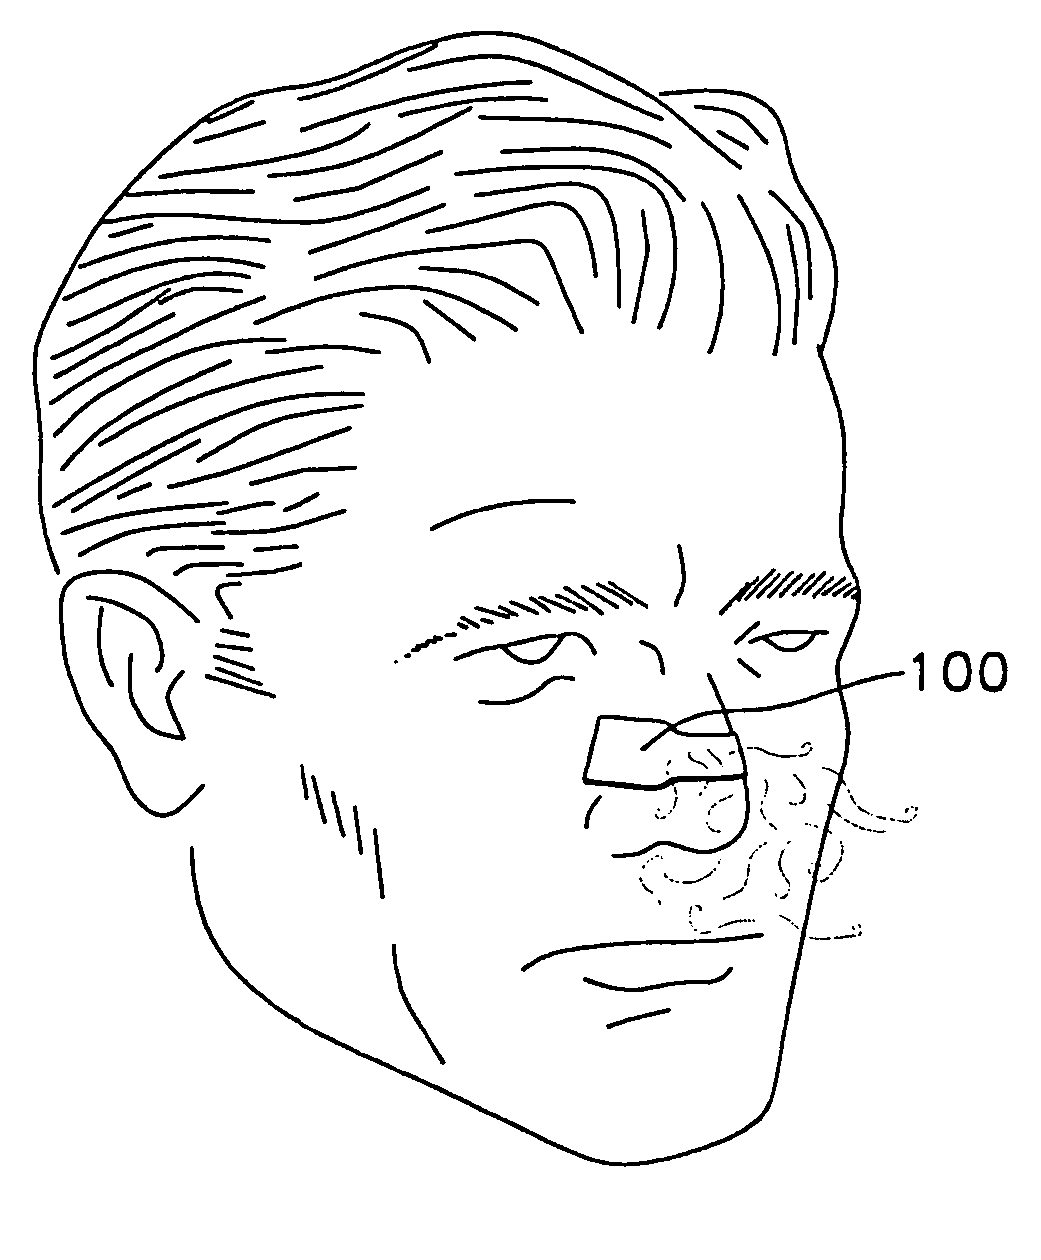 Adhesively applied external nasal strips and dilators containing medications and fragrances